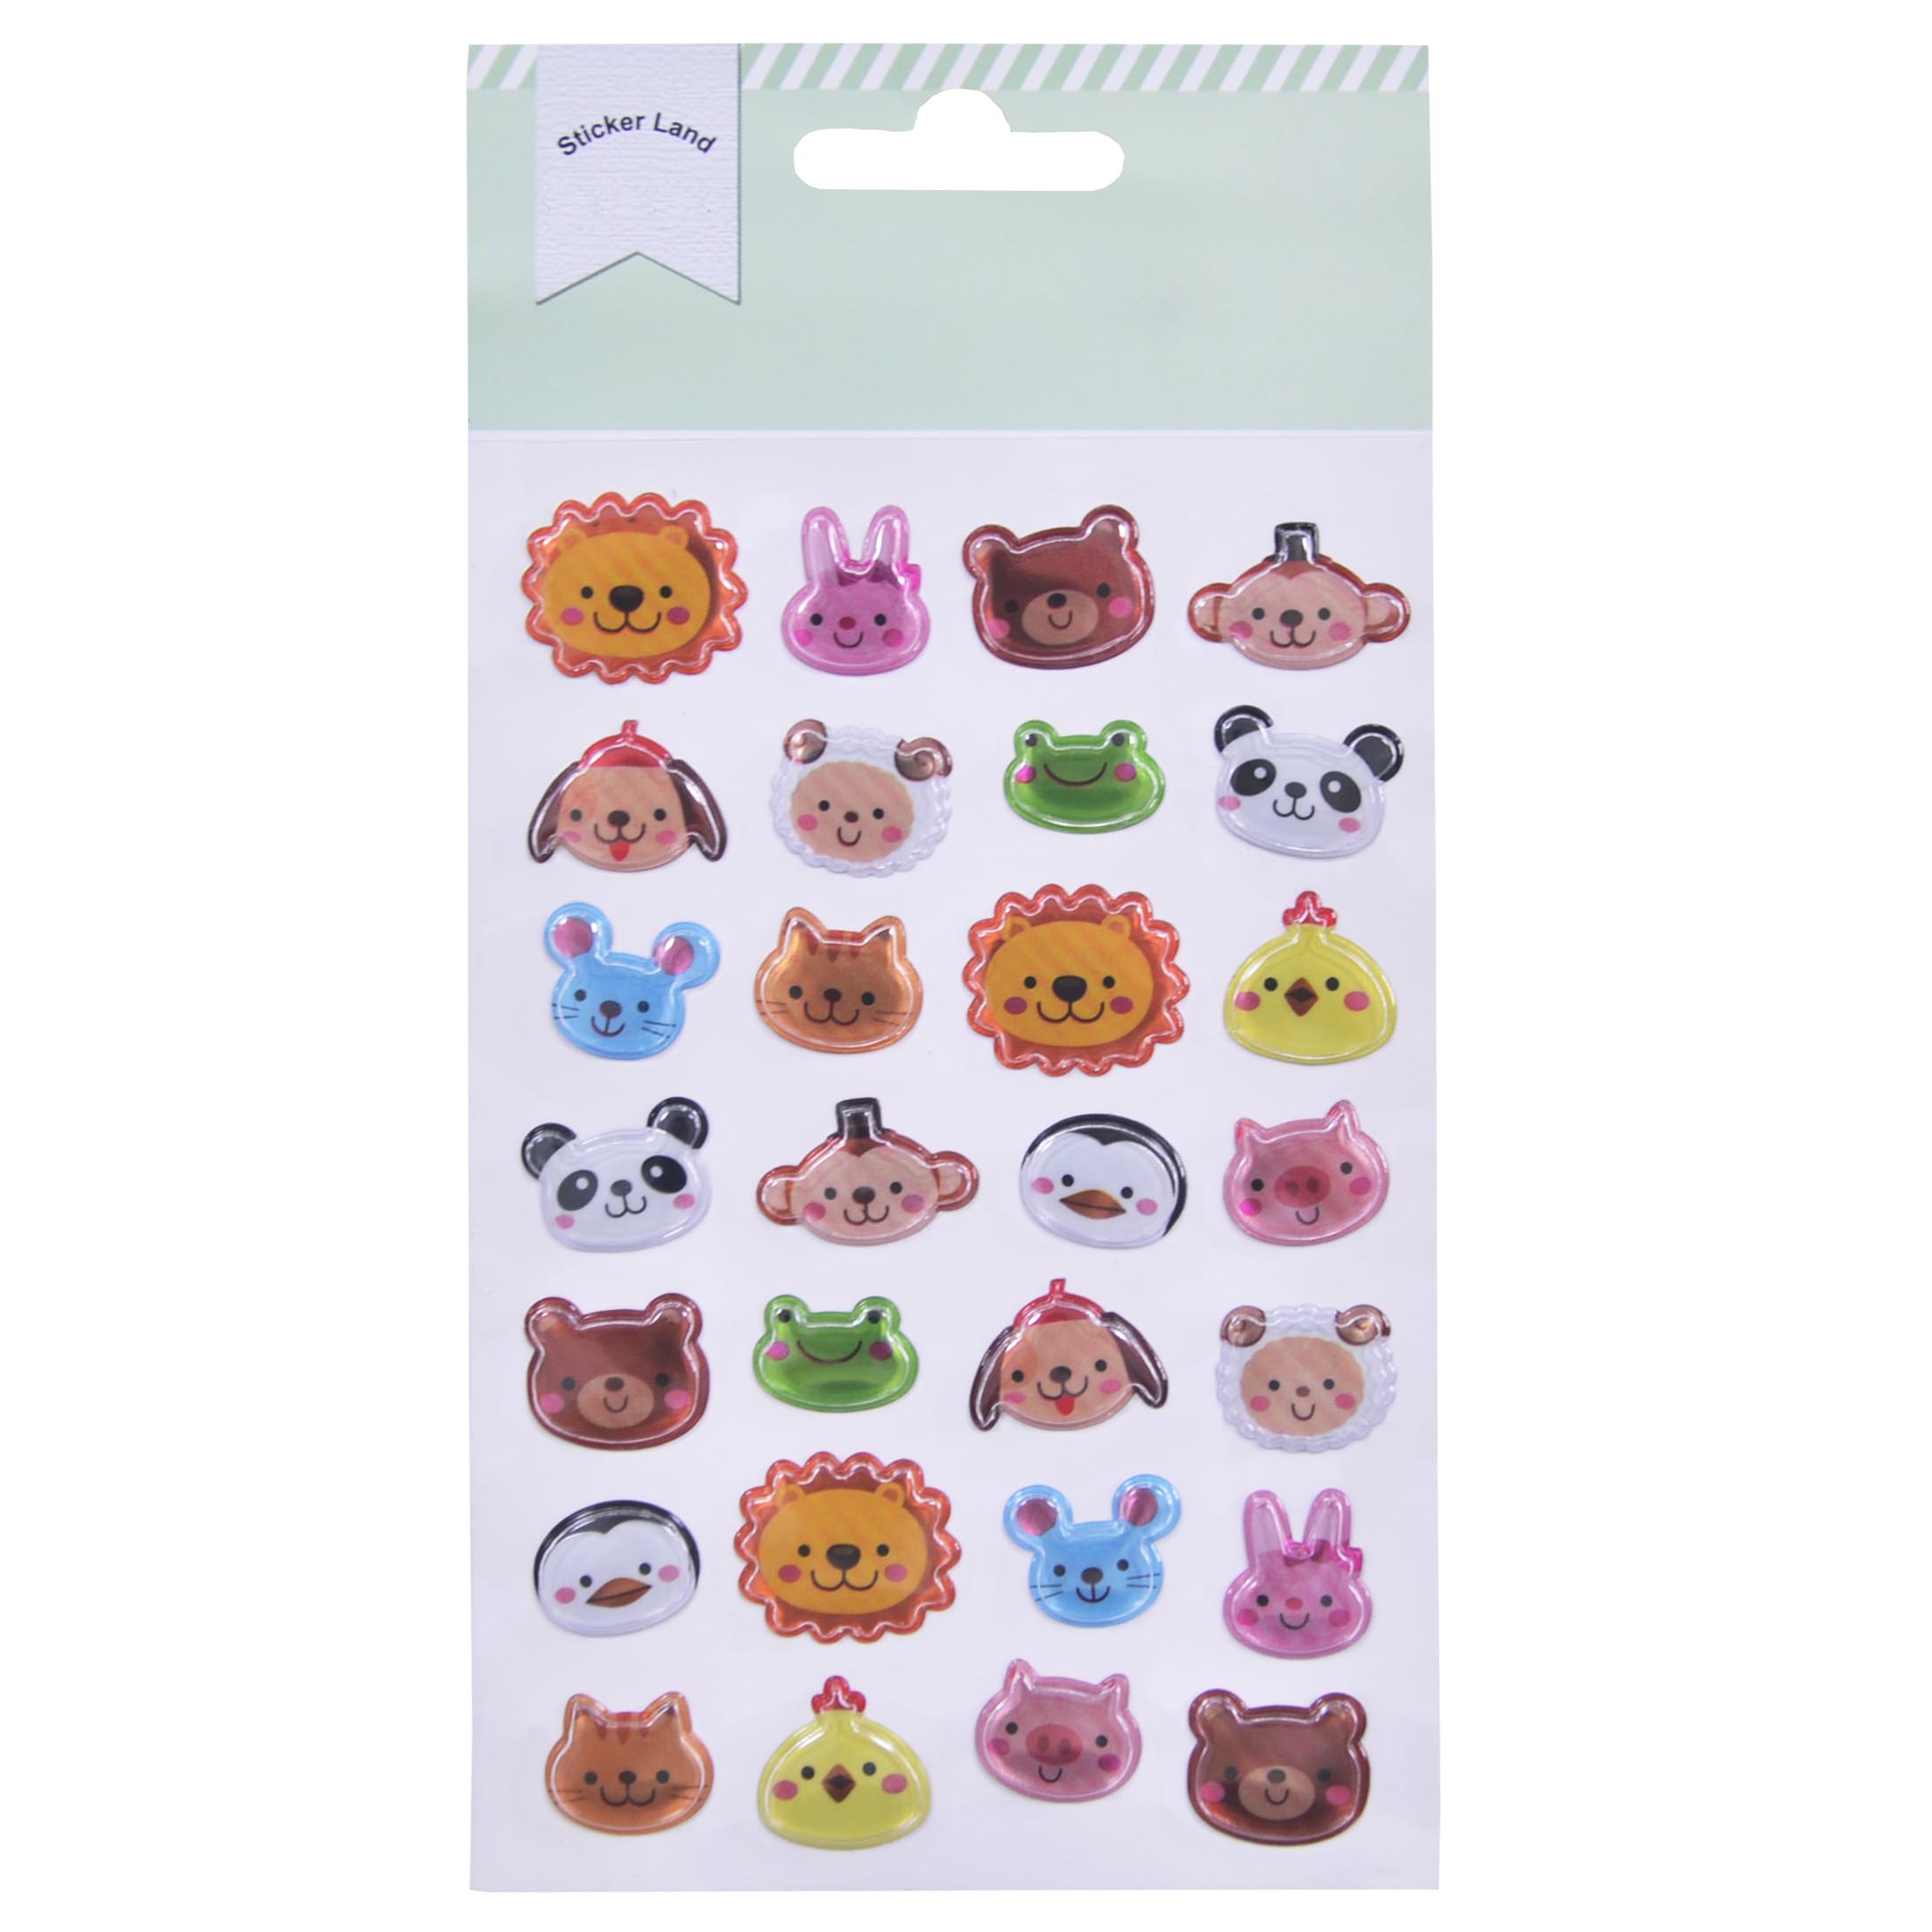 Custom 3D Blister Plastic Sticker With Smile Animals Faces